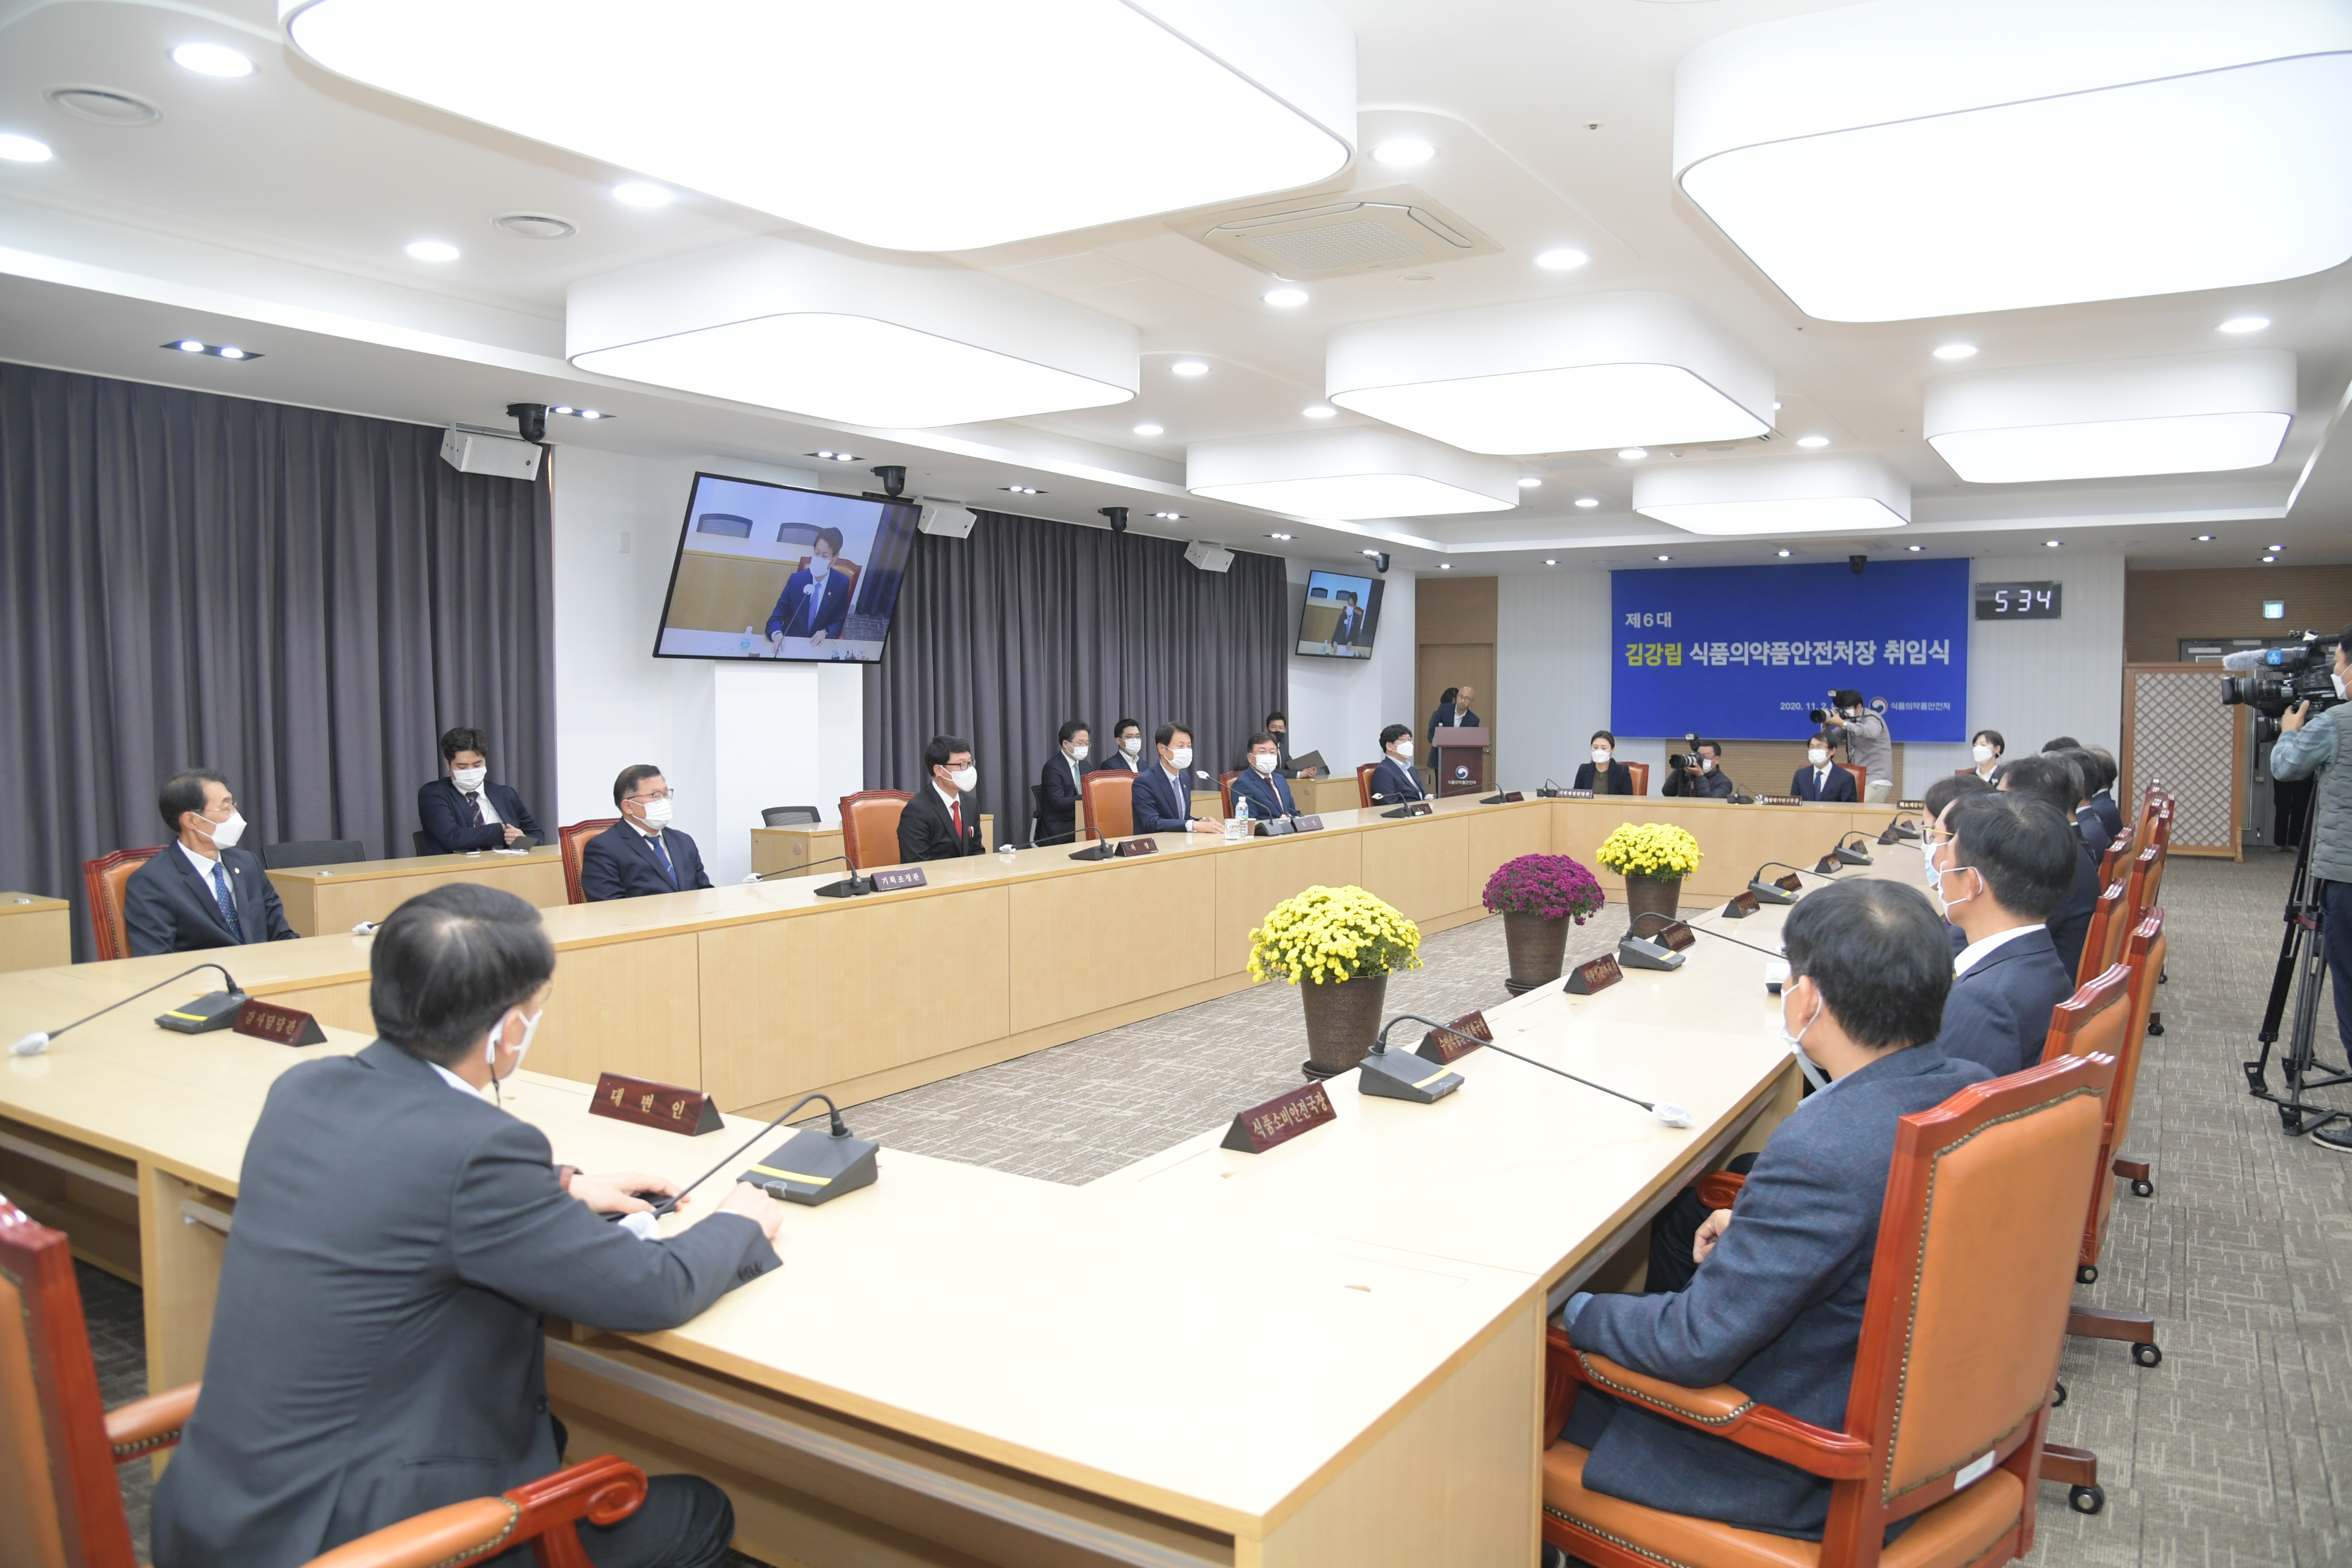 Photo News2 - [Nov. 2, 2020] Inauguration of Minister Kim Ganglip as the 6th Minister of Food and Drug Safety